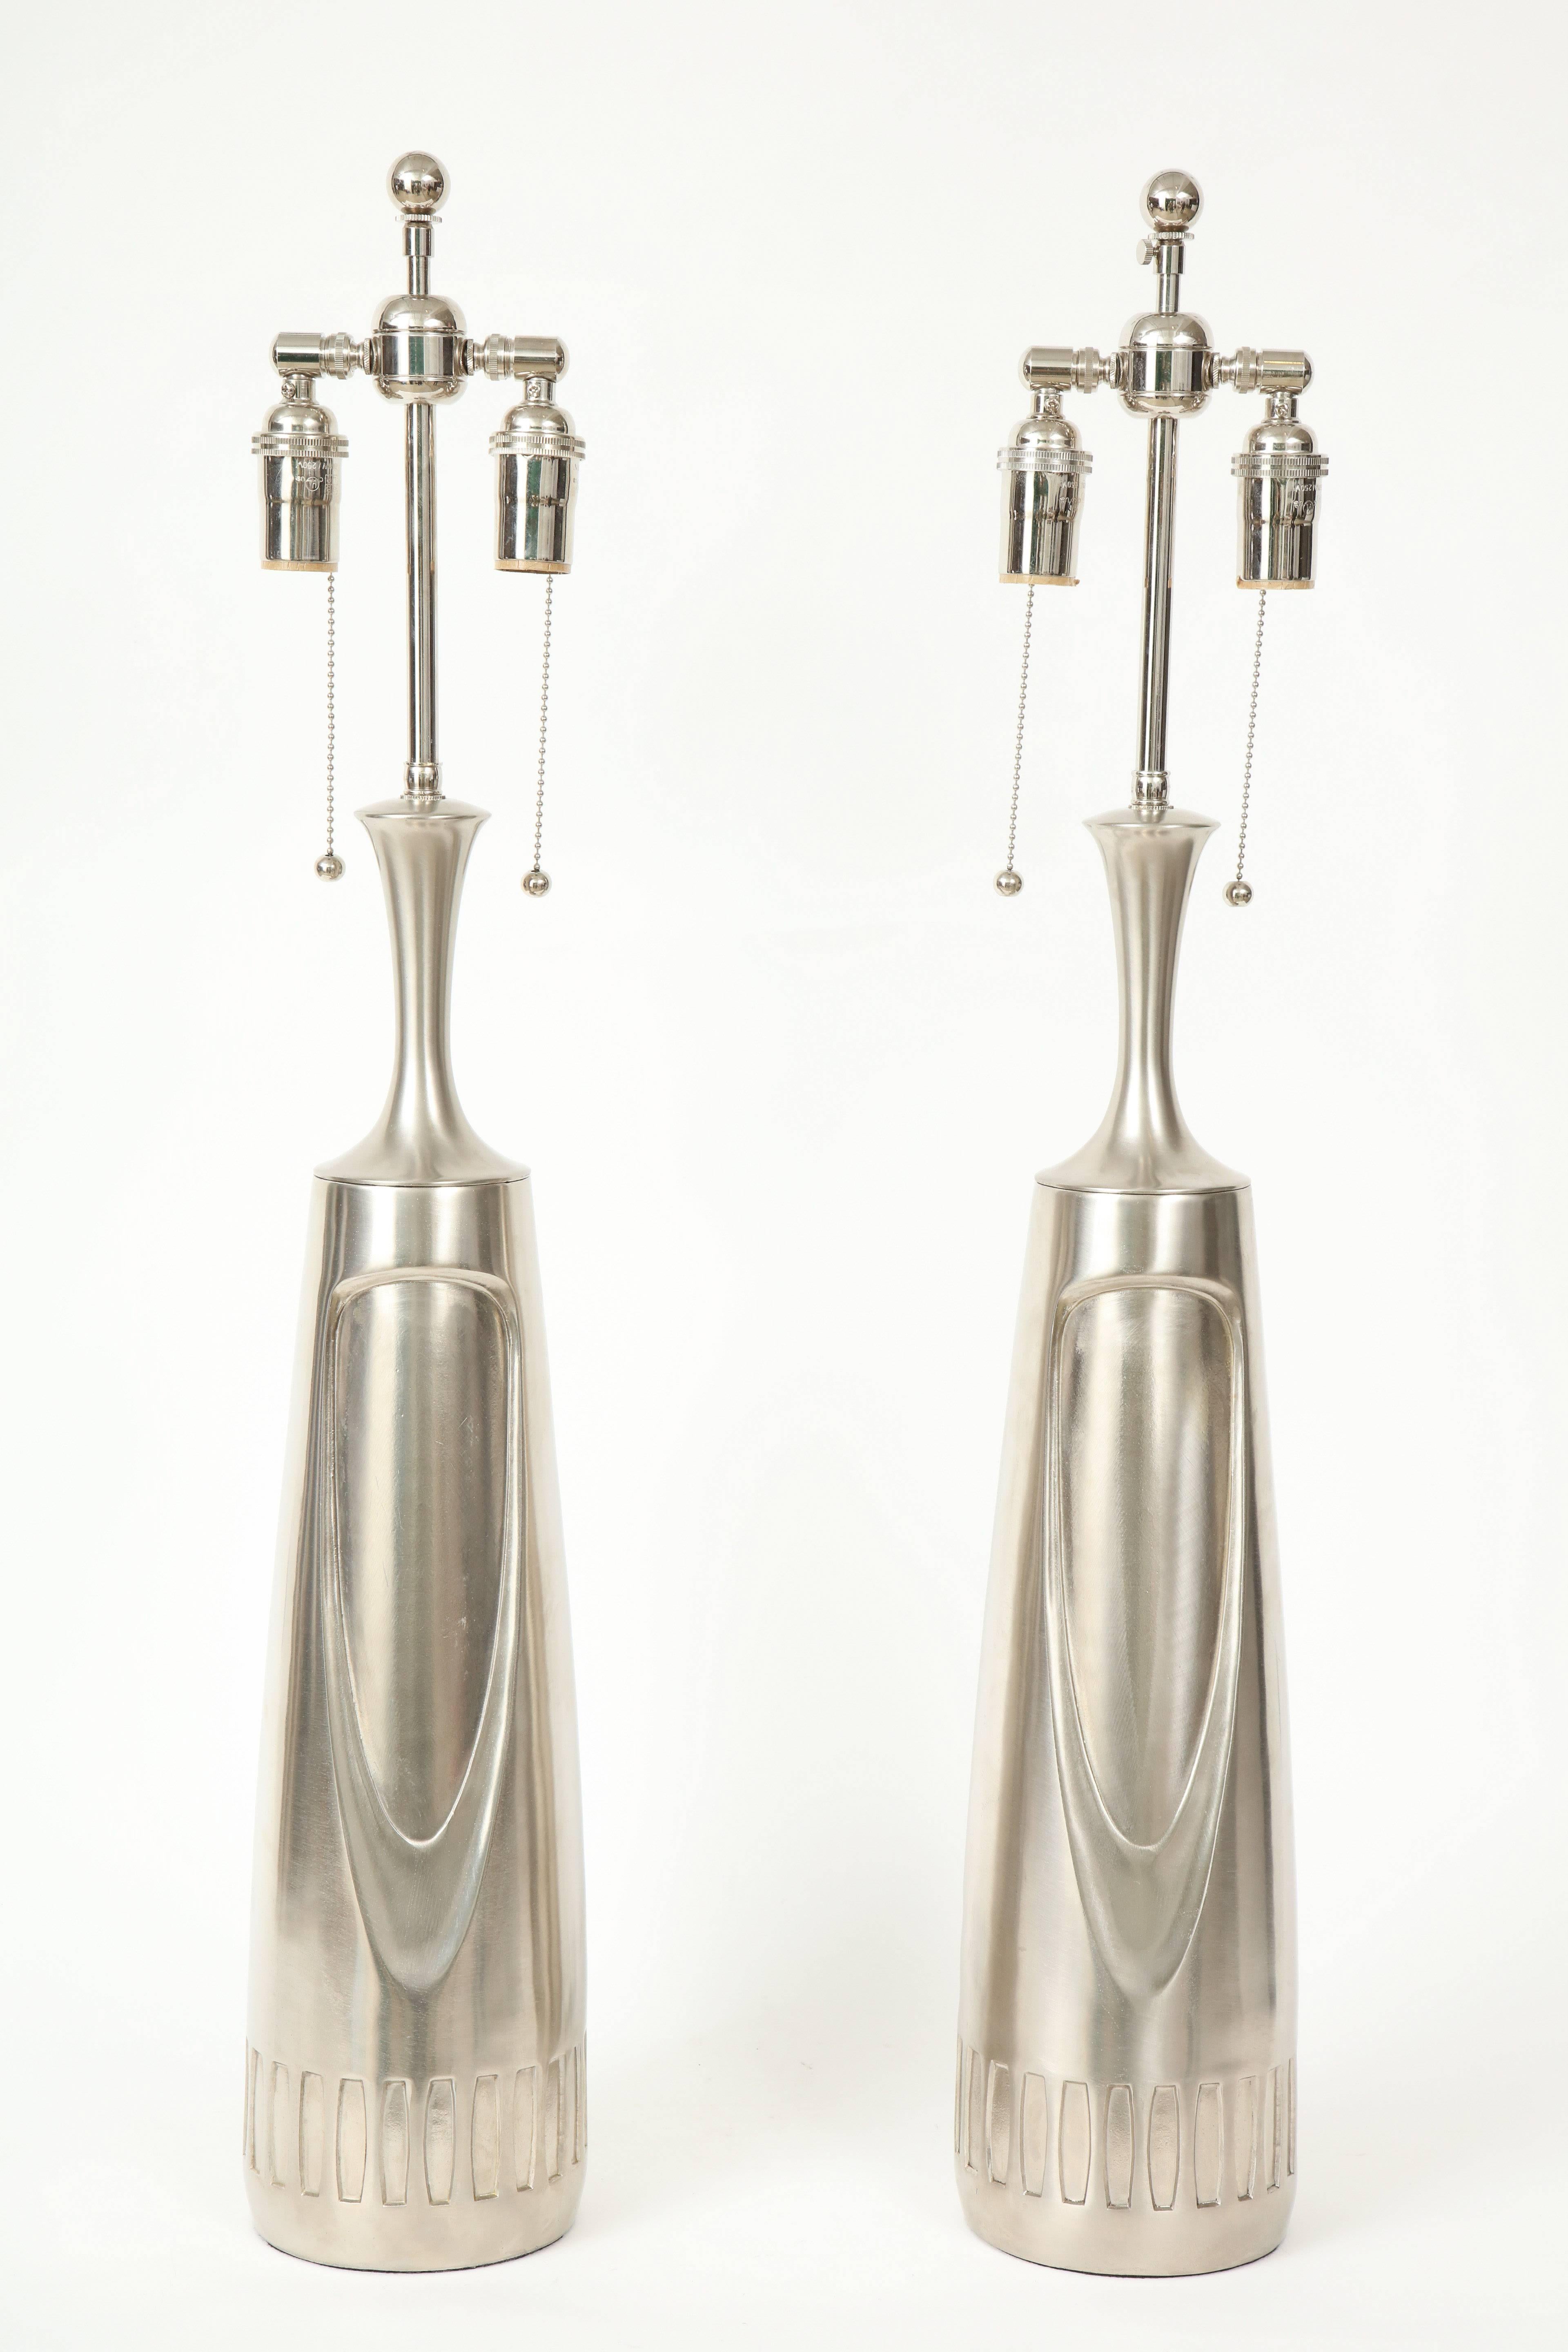 Pair of 1970s laurel lamps with a brushed aluminium finish.
The lamps have a recessed design to the front and rear.
They have been newly rewired for the US with chrome double clusters that take standard light bulbs.
The height to the top of the